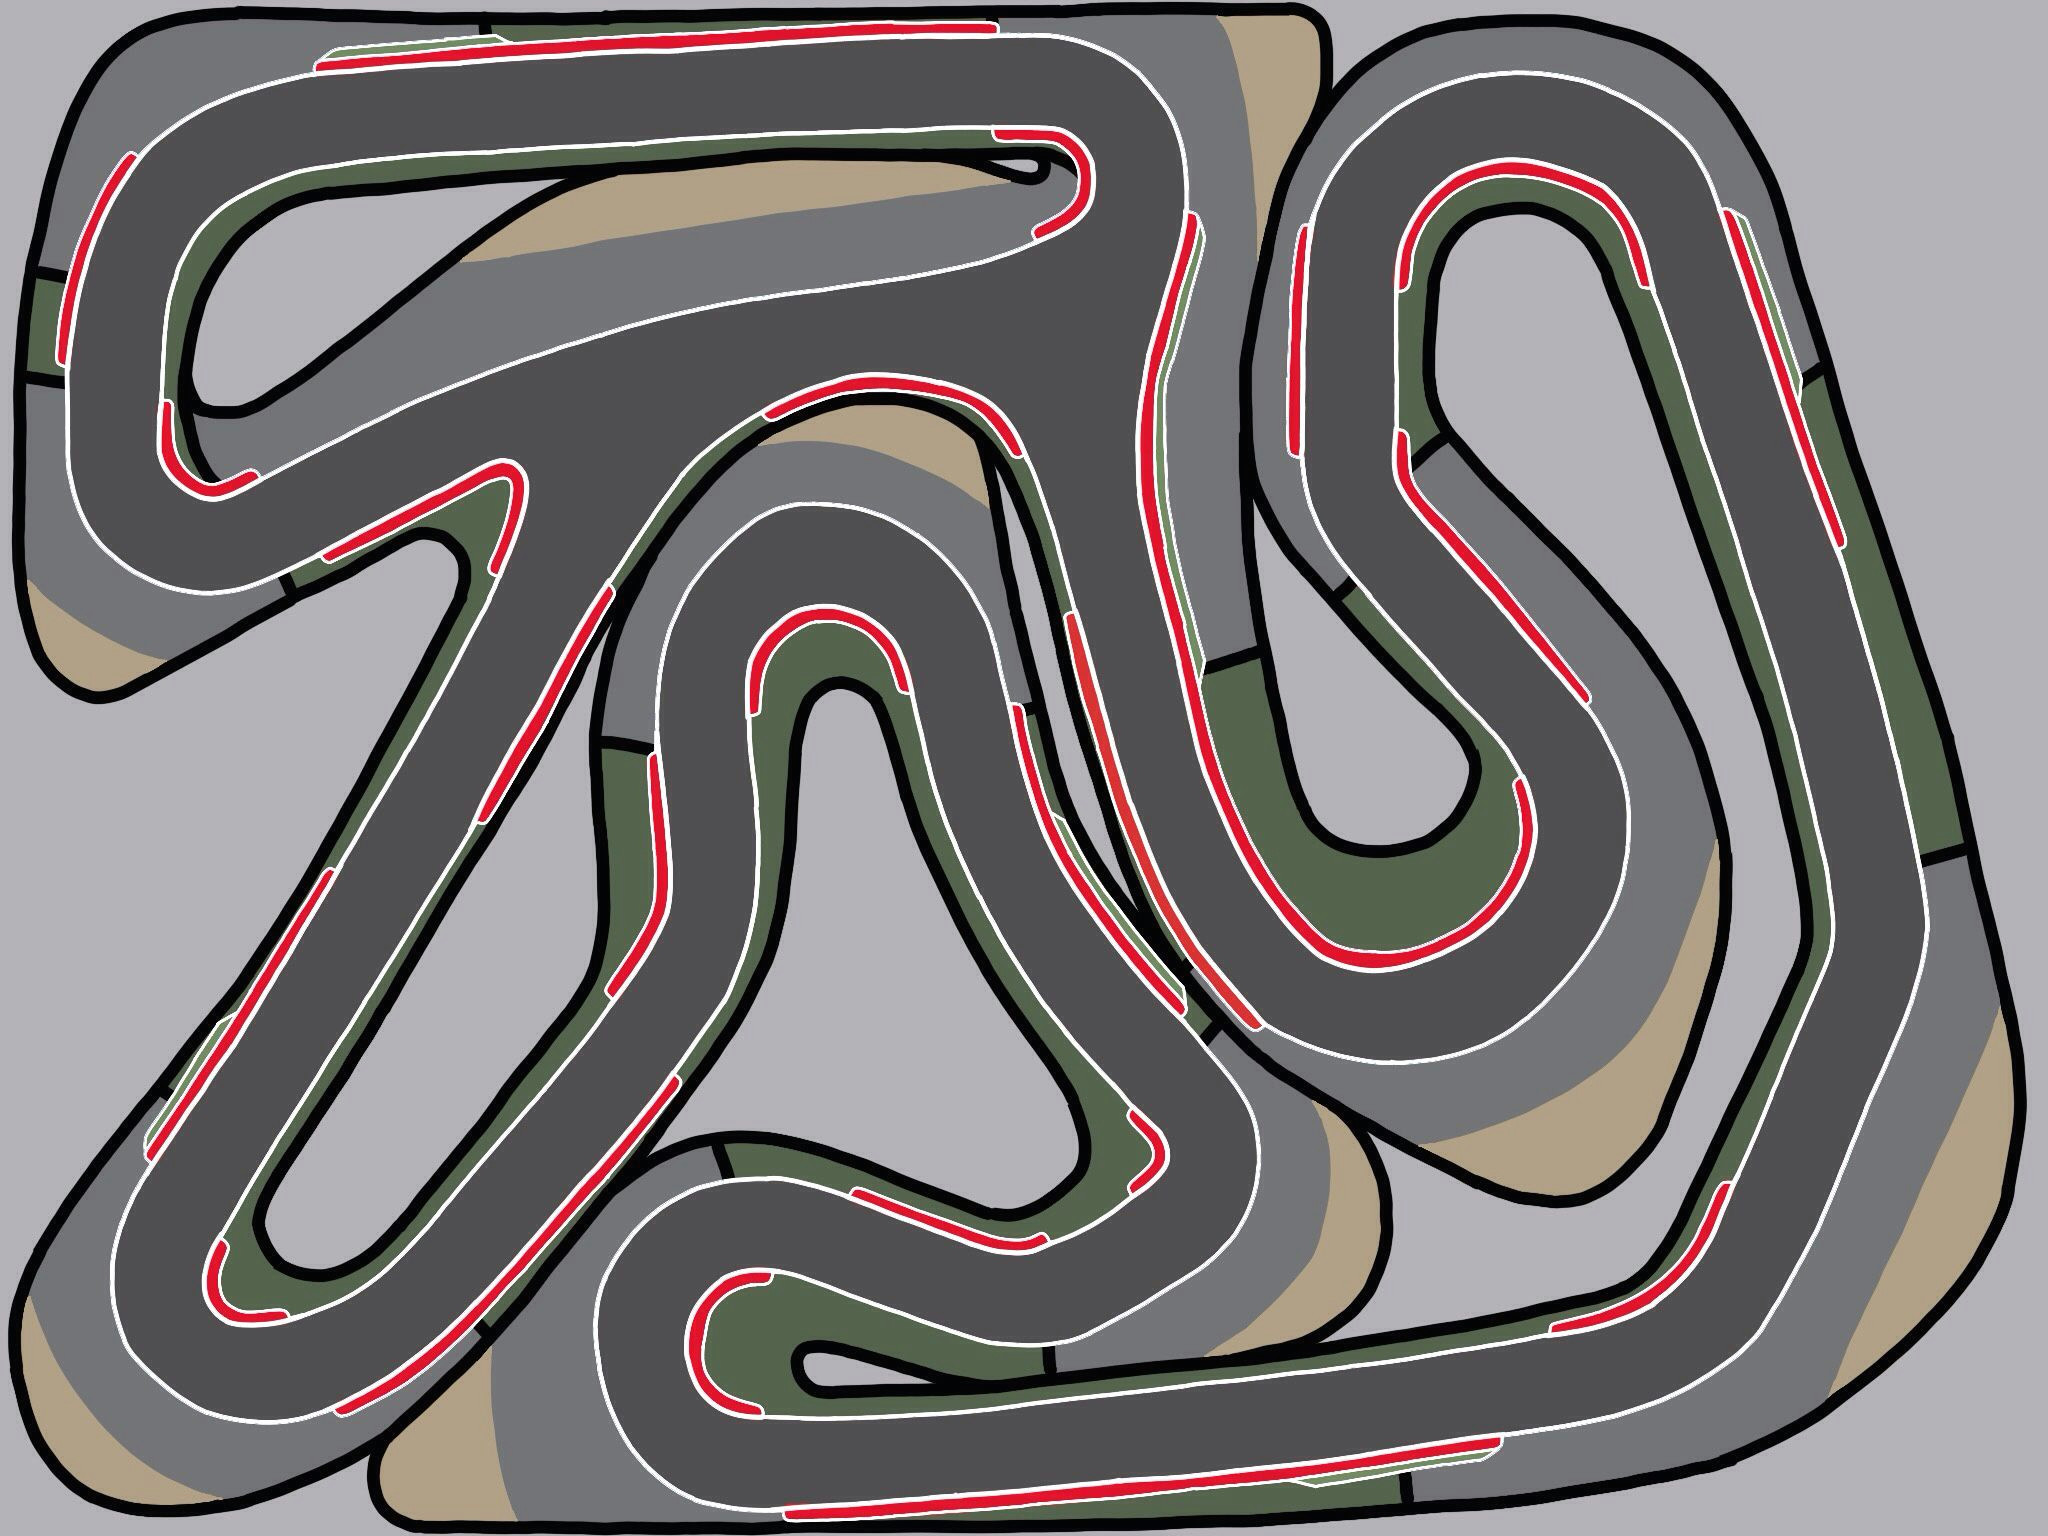 i signed up mainly to contribute to this subreddit as i ve been making race track designs all my life getting more detailed as time has passed of course